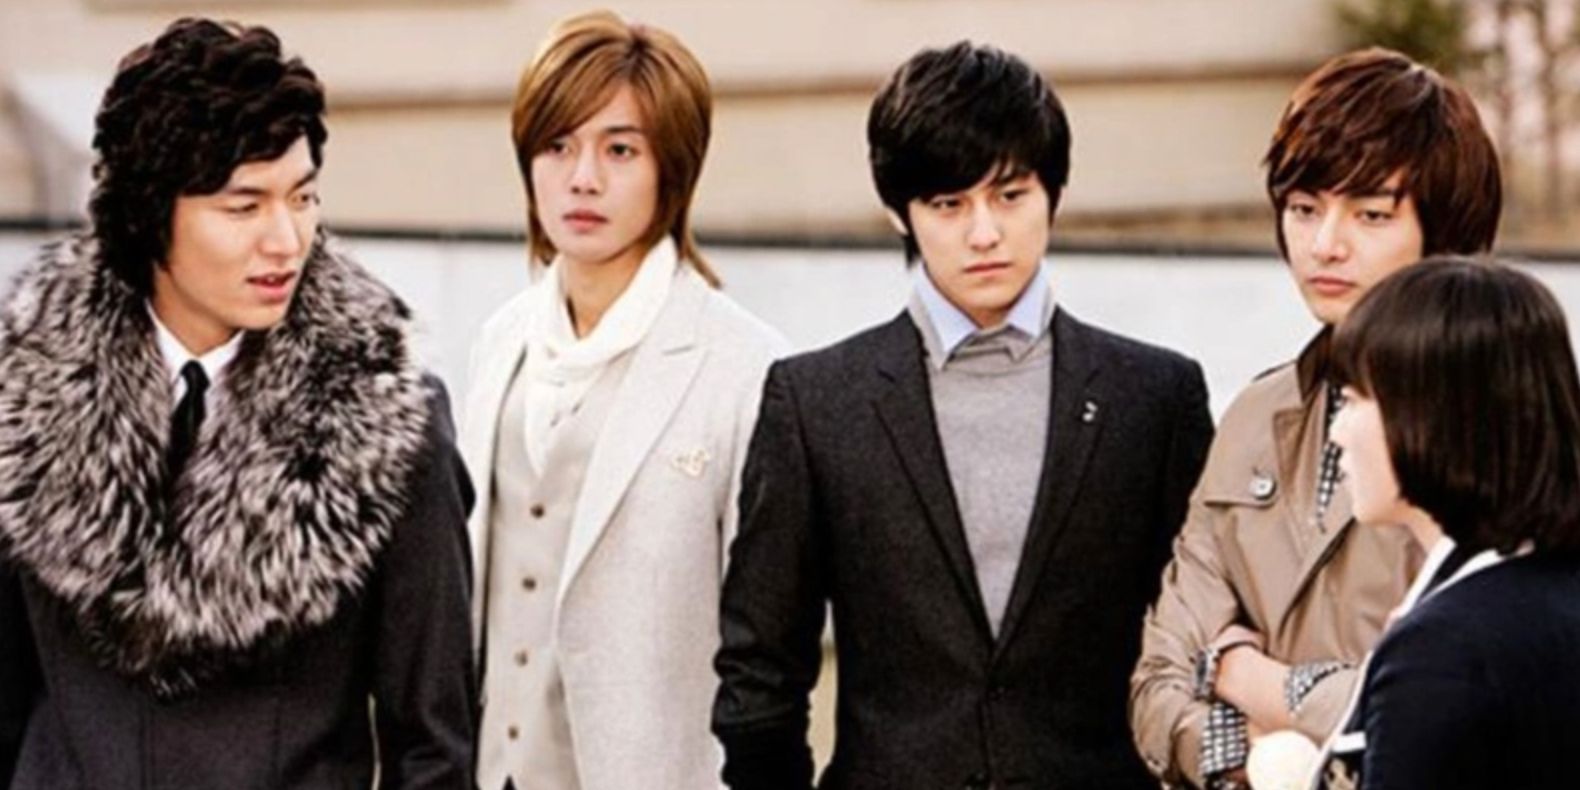 The main cast of Boys Over Flowers